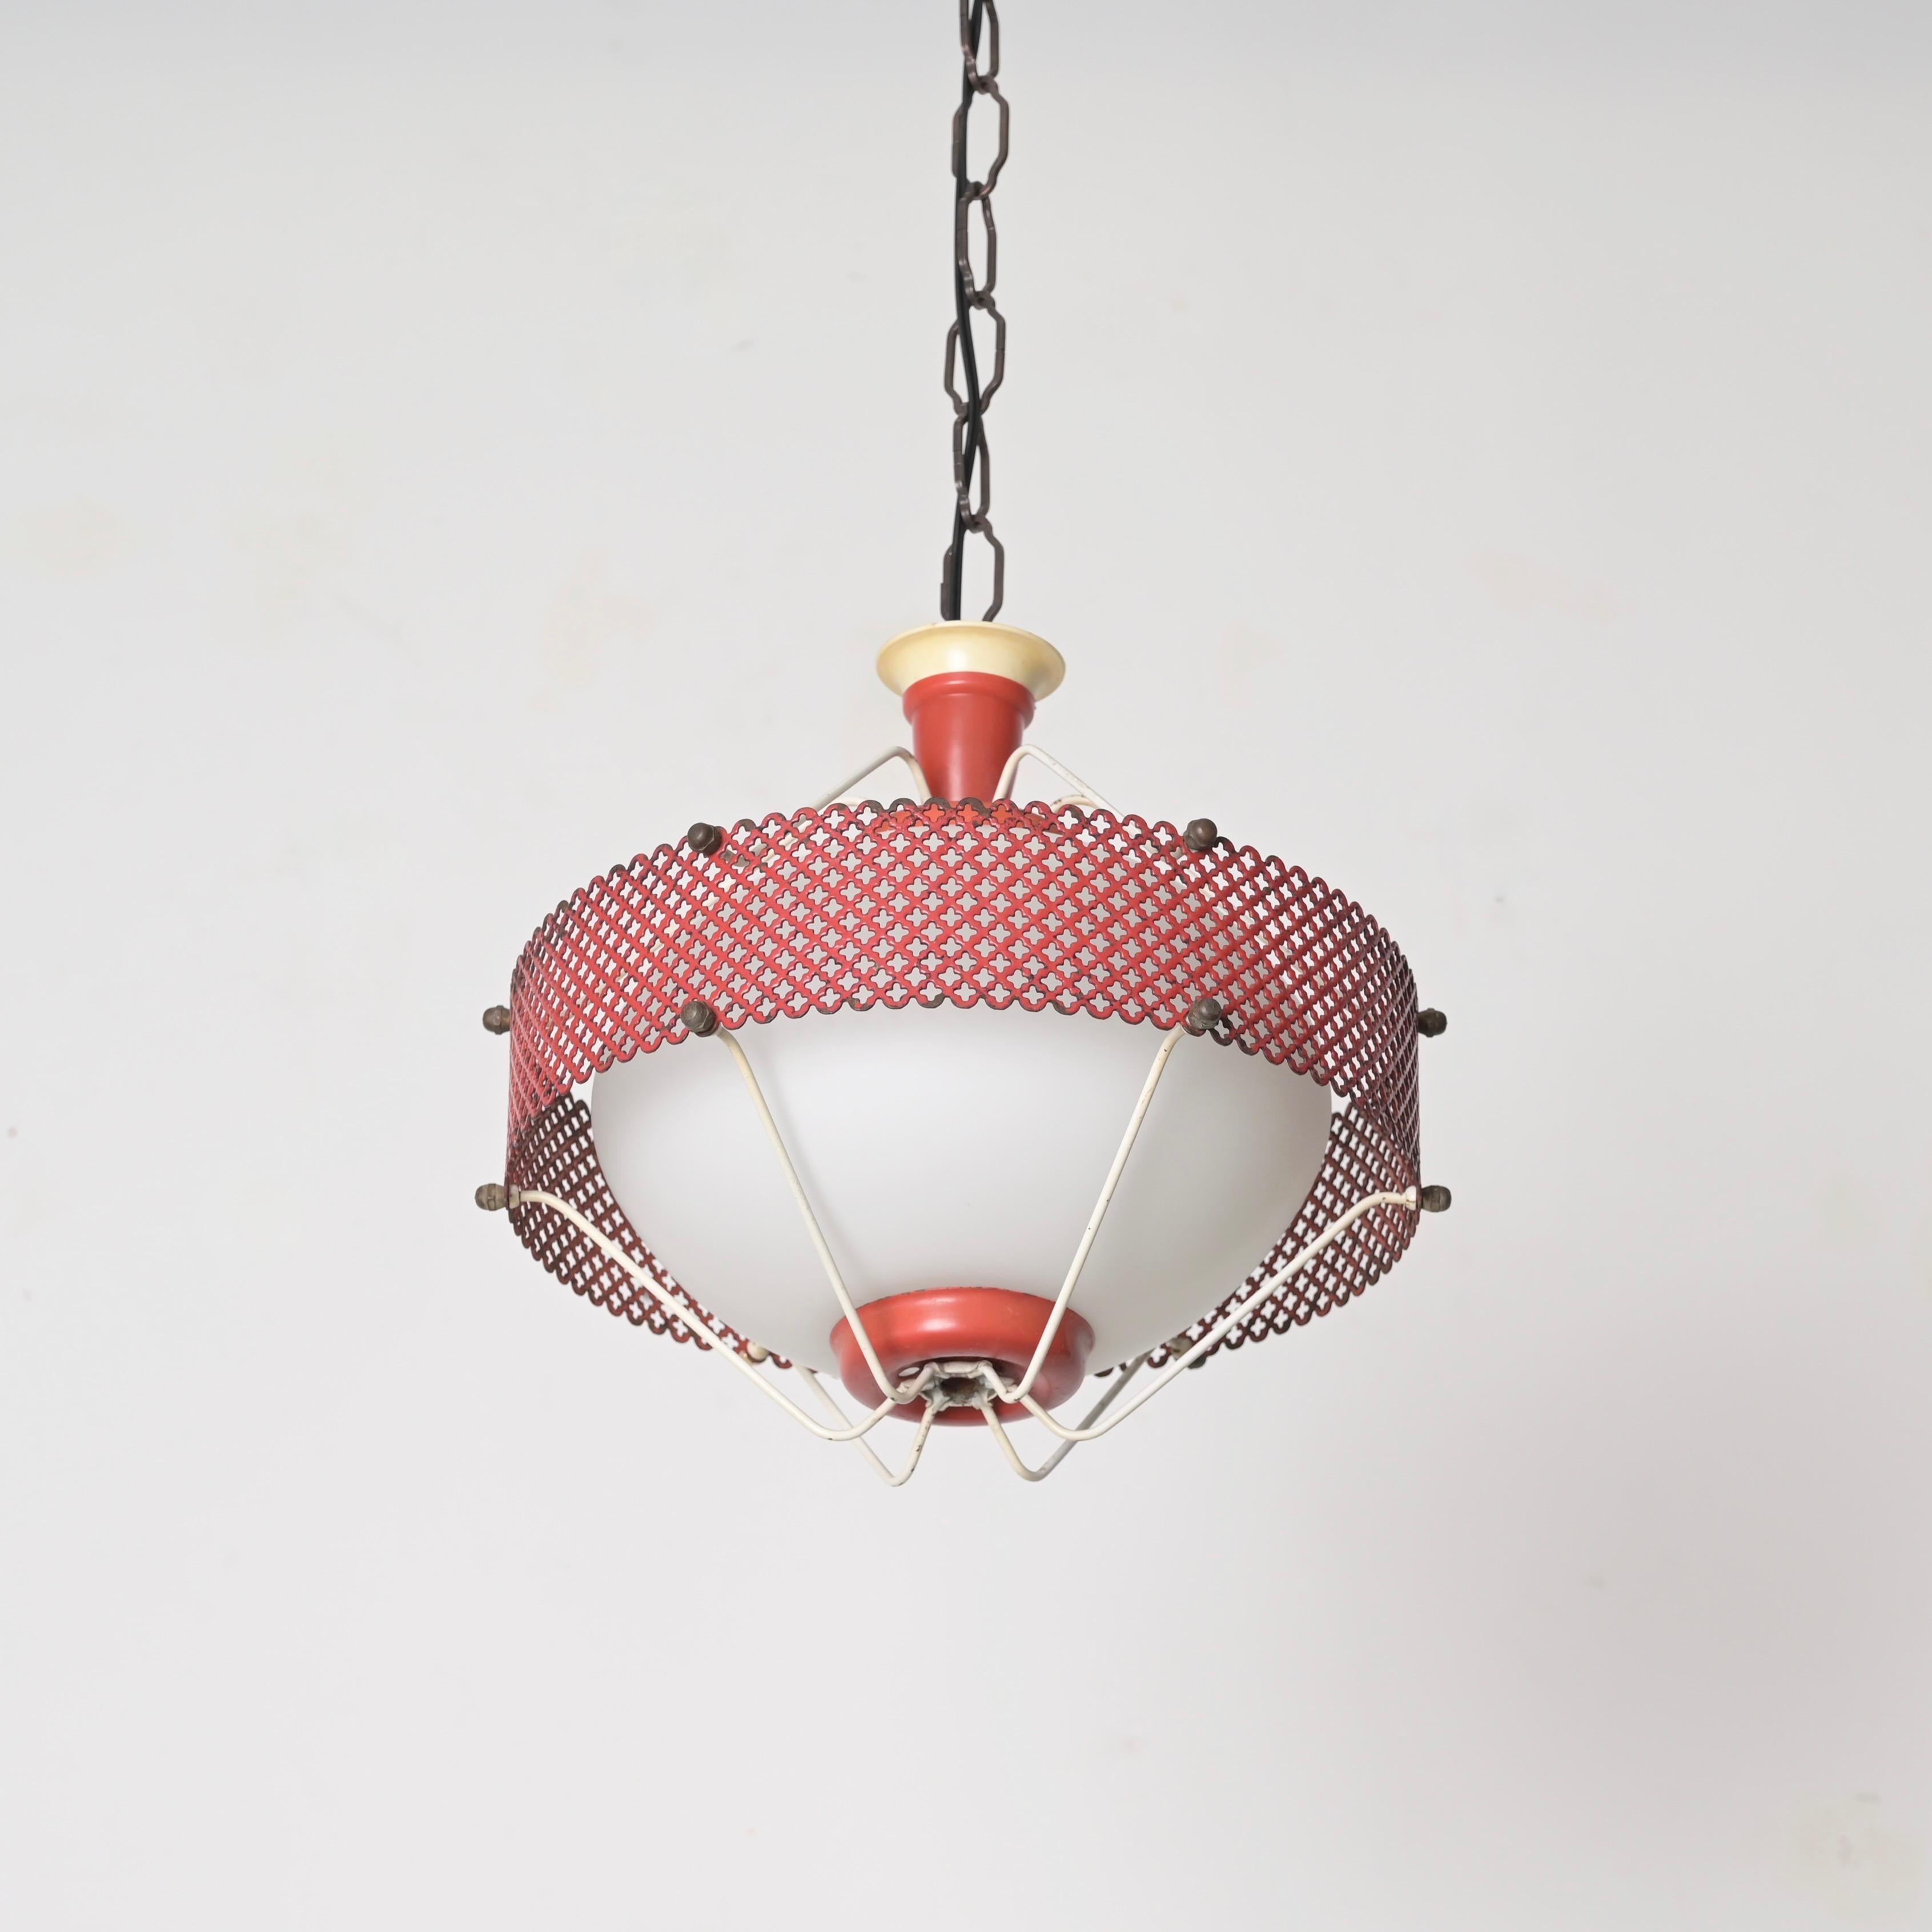 Mathieu Matégot Pendant Lamps in Opal Glass, Red Metal, 1950s French Lighting For Sale 3